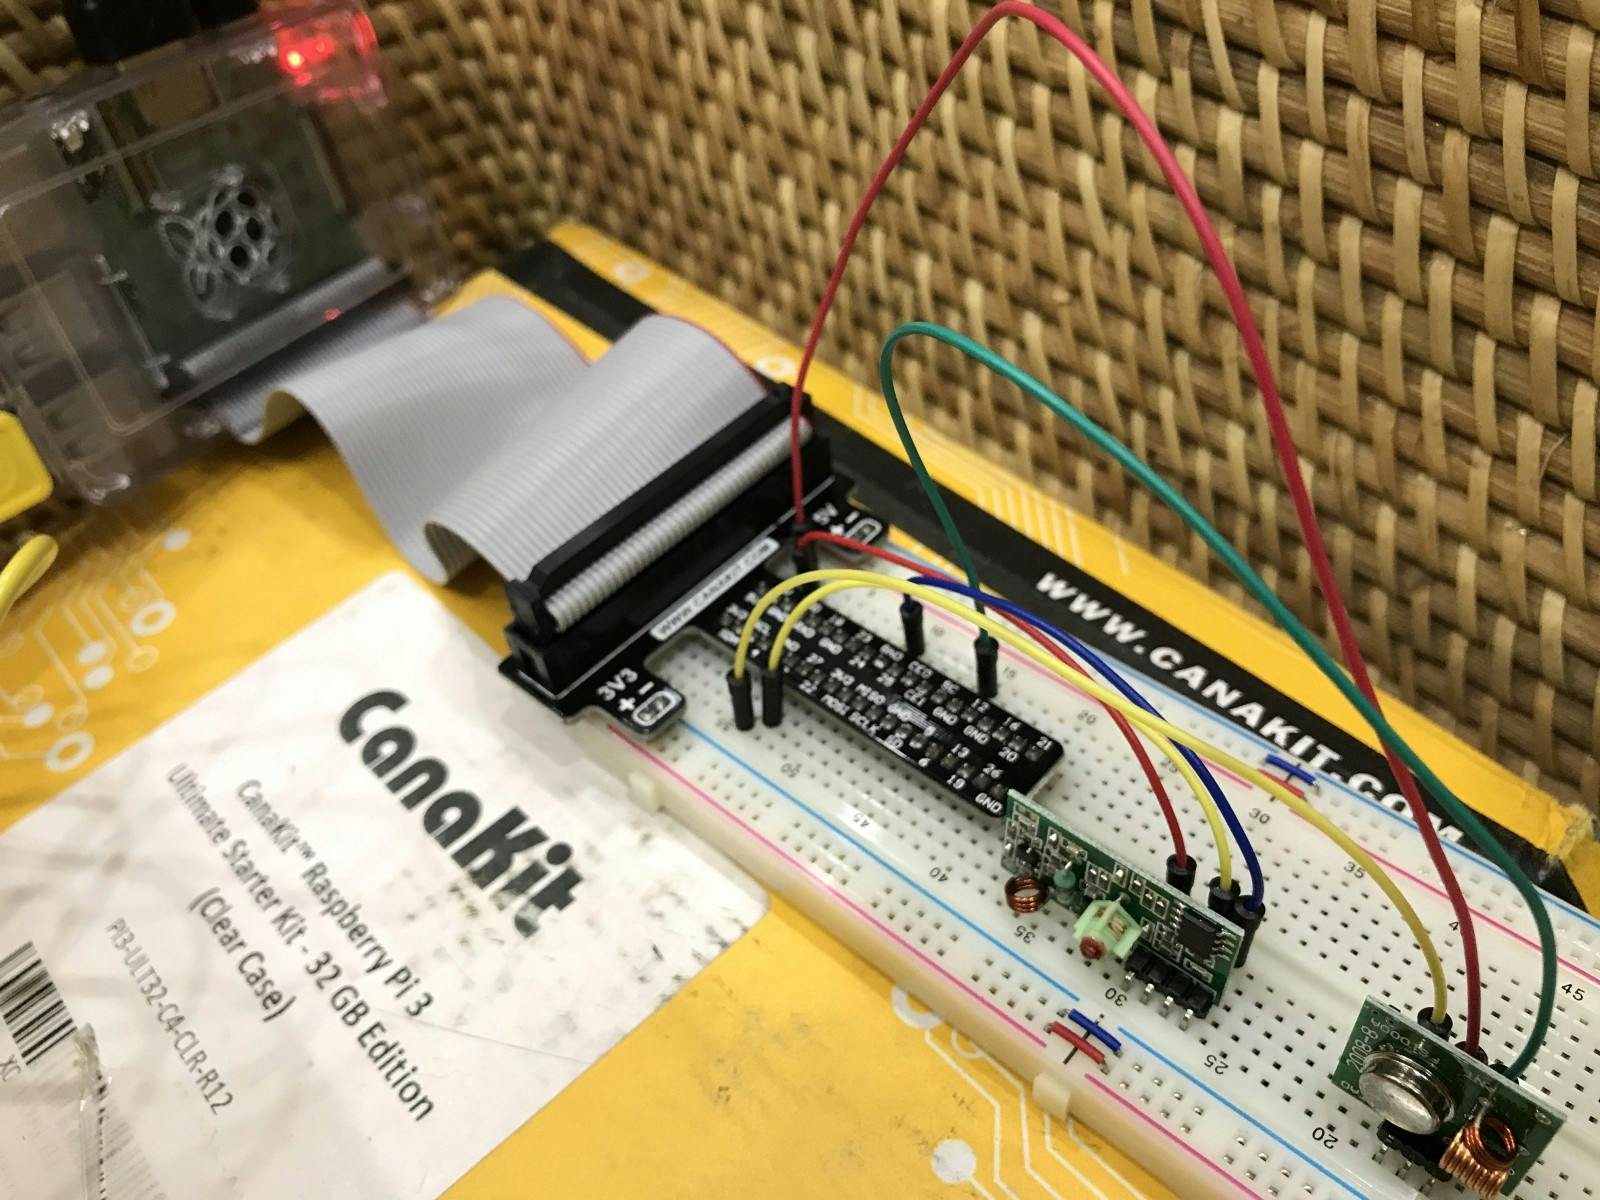 /diy-home-automation-fan-control-with-raspberry-pi-3-rf-transmitter-and-homebridge-59ad24845770 feature image